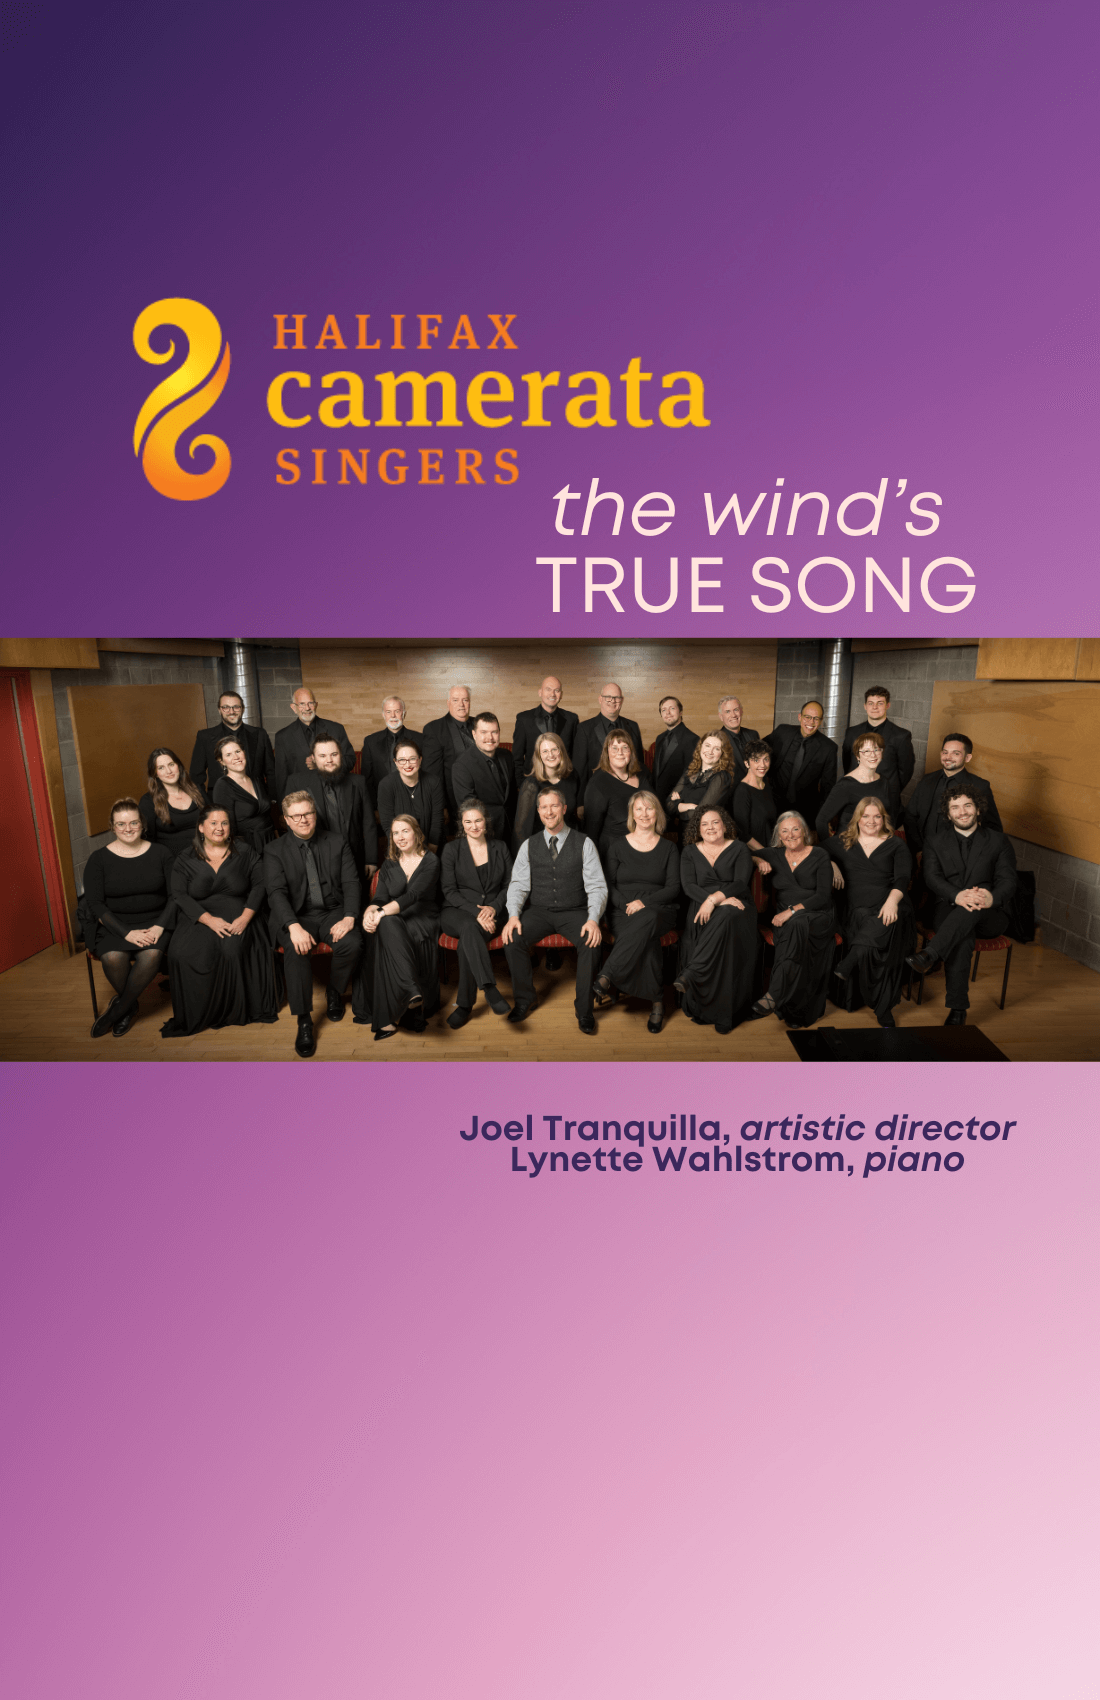 The Halifax Camerata Singers the wind's true song. Purple and gold background. Photogrpahs of a chamber choir . Men and women dressed in formal black attire.